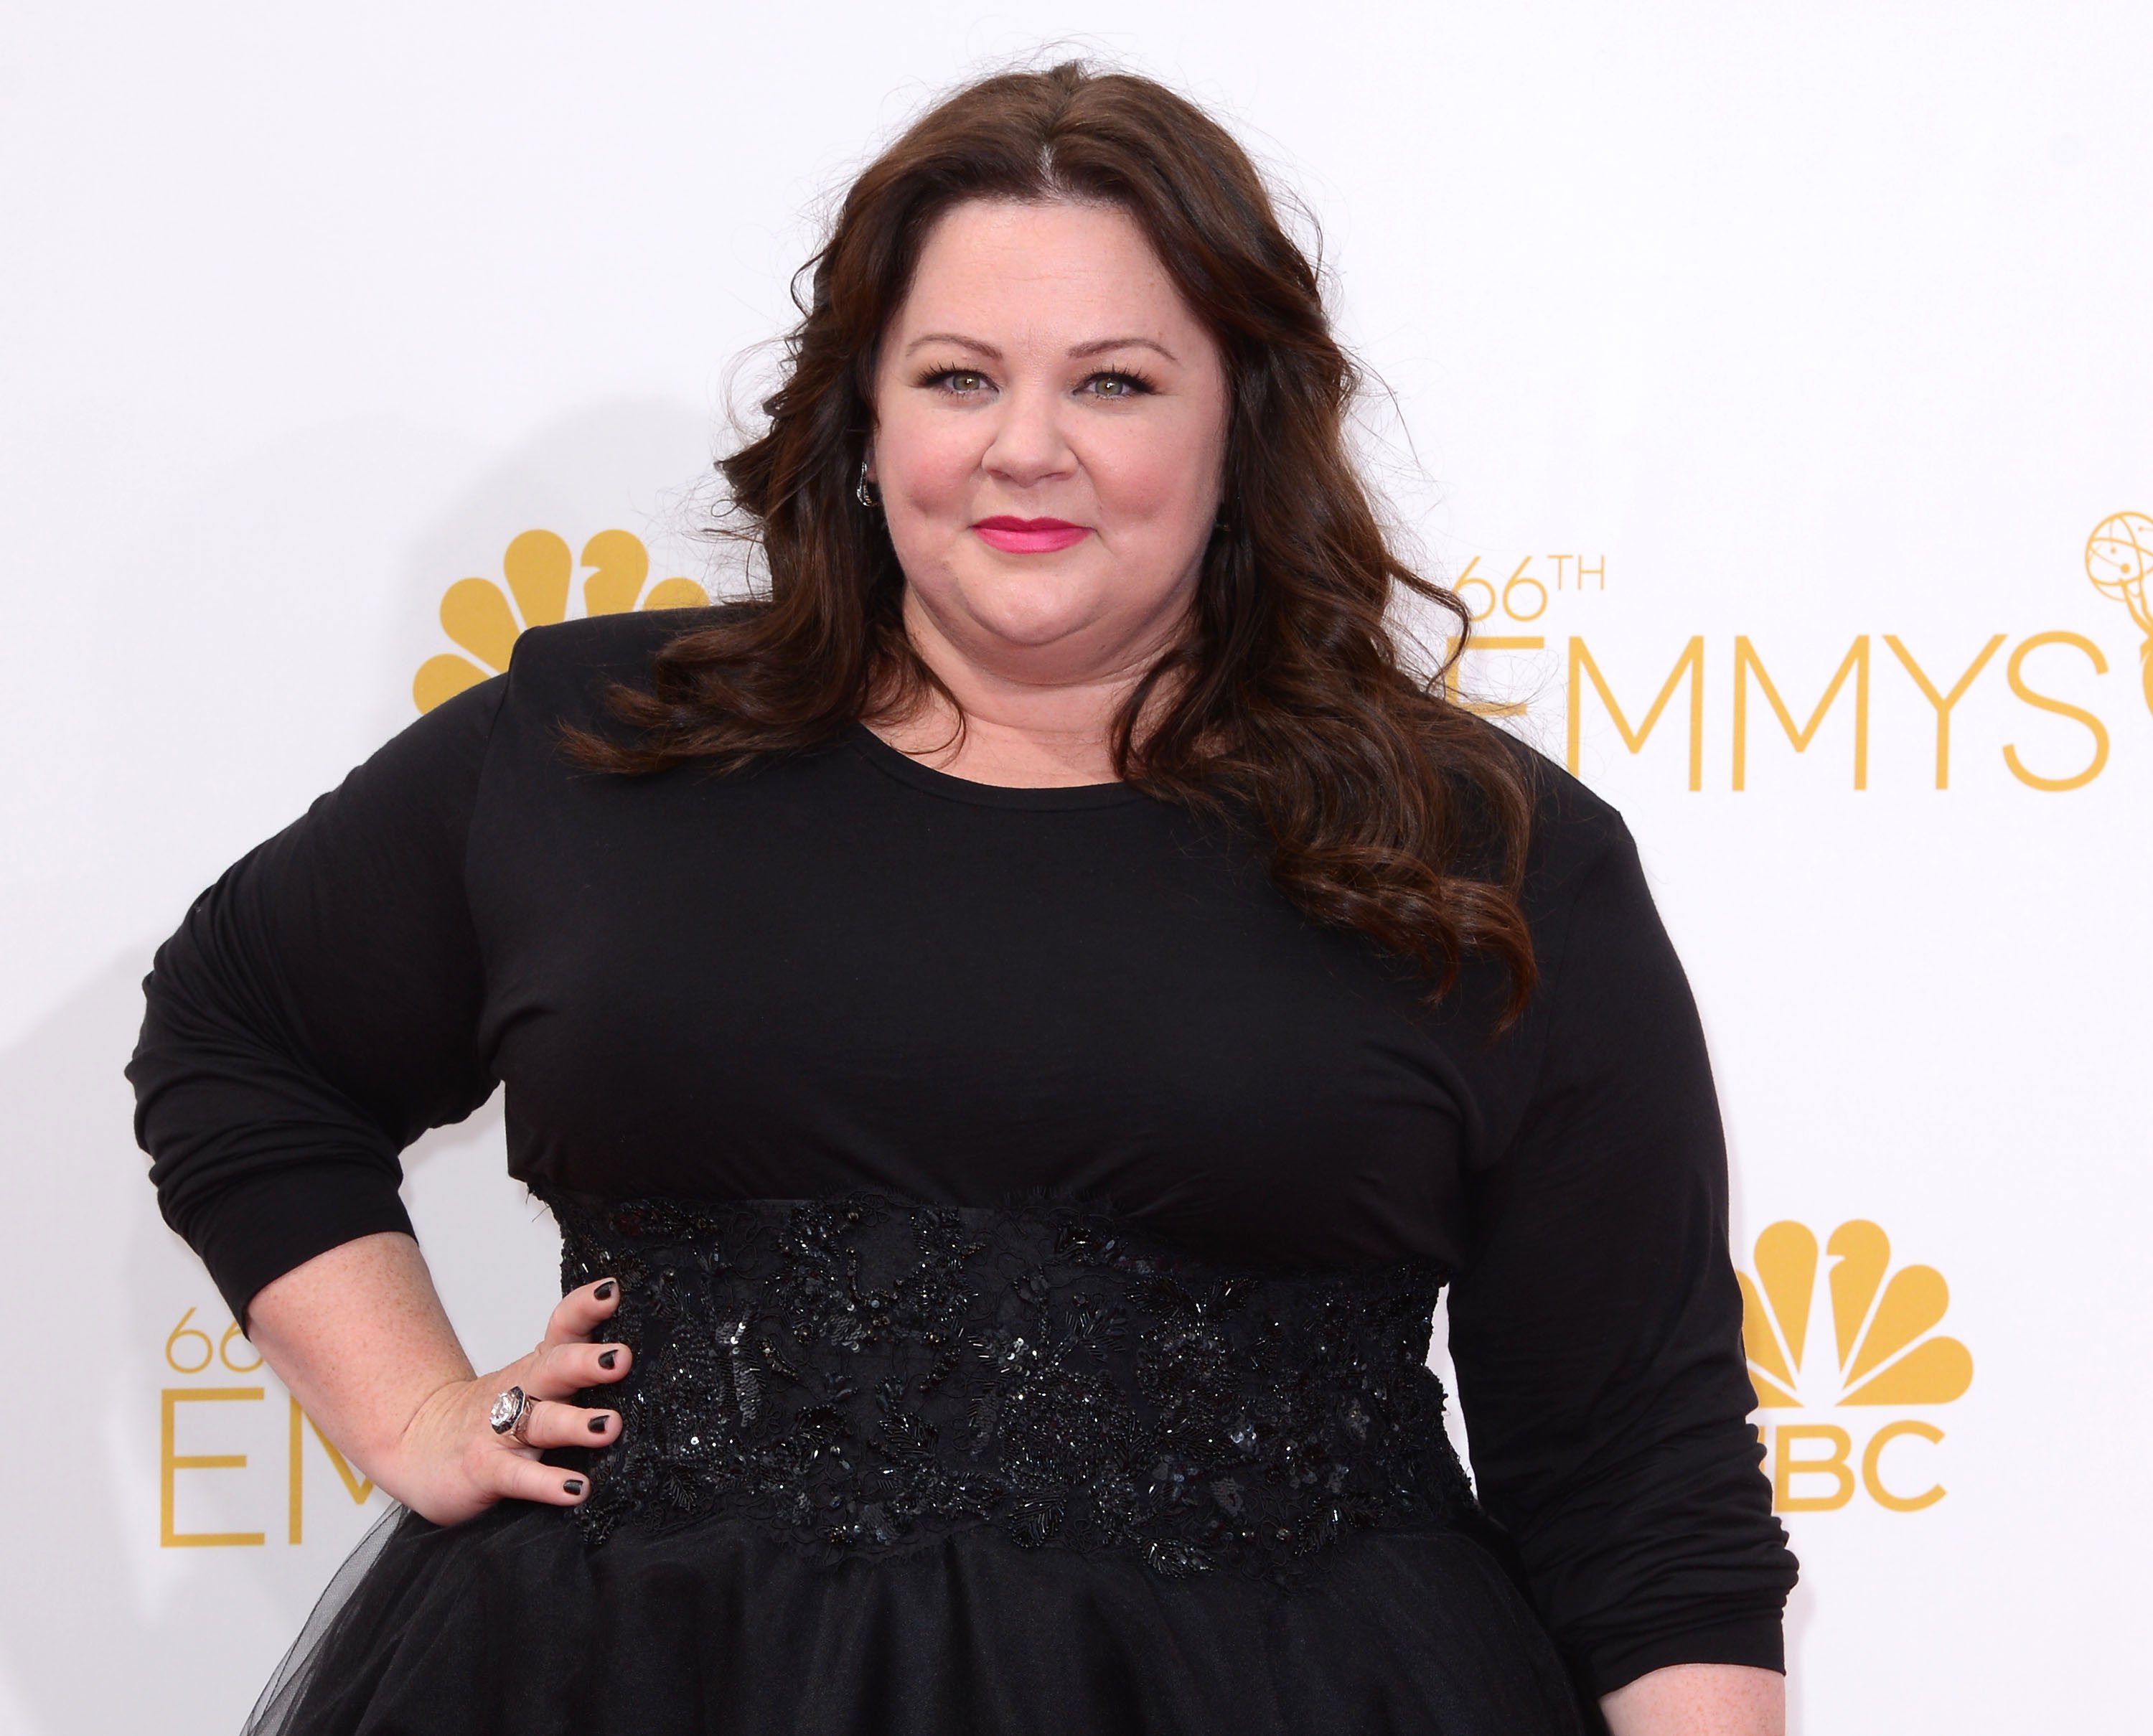 Melissa McCarthy arrives at the 66th Annual Primetime Emmy Awards on August 25, 2014 in Los Angeles, California I Source: Getty Images